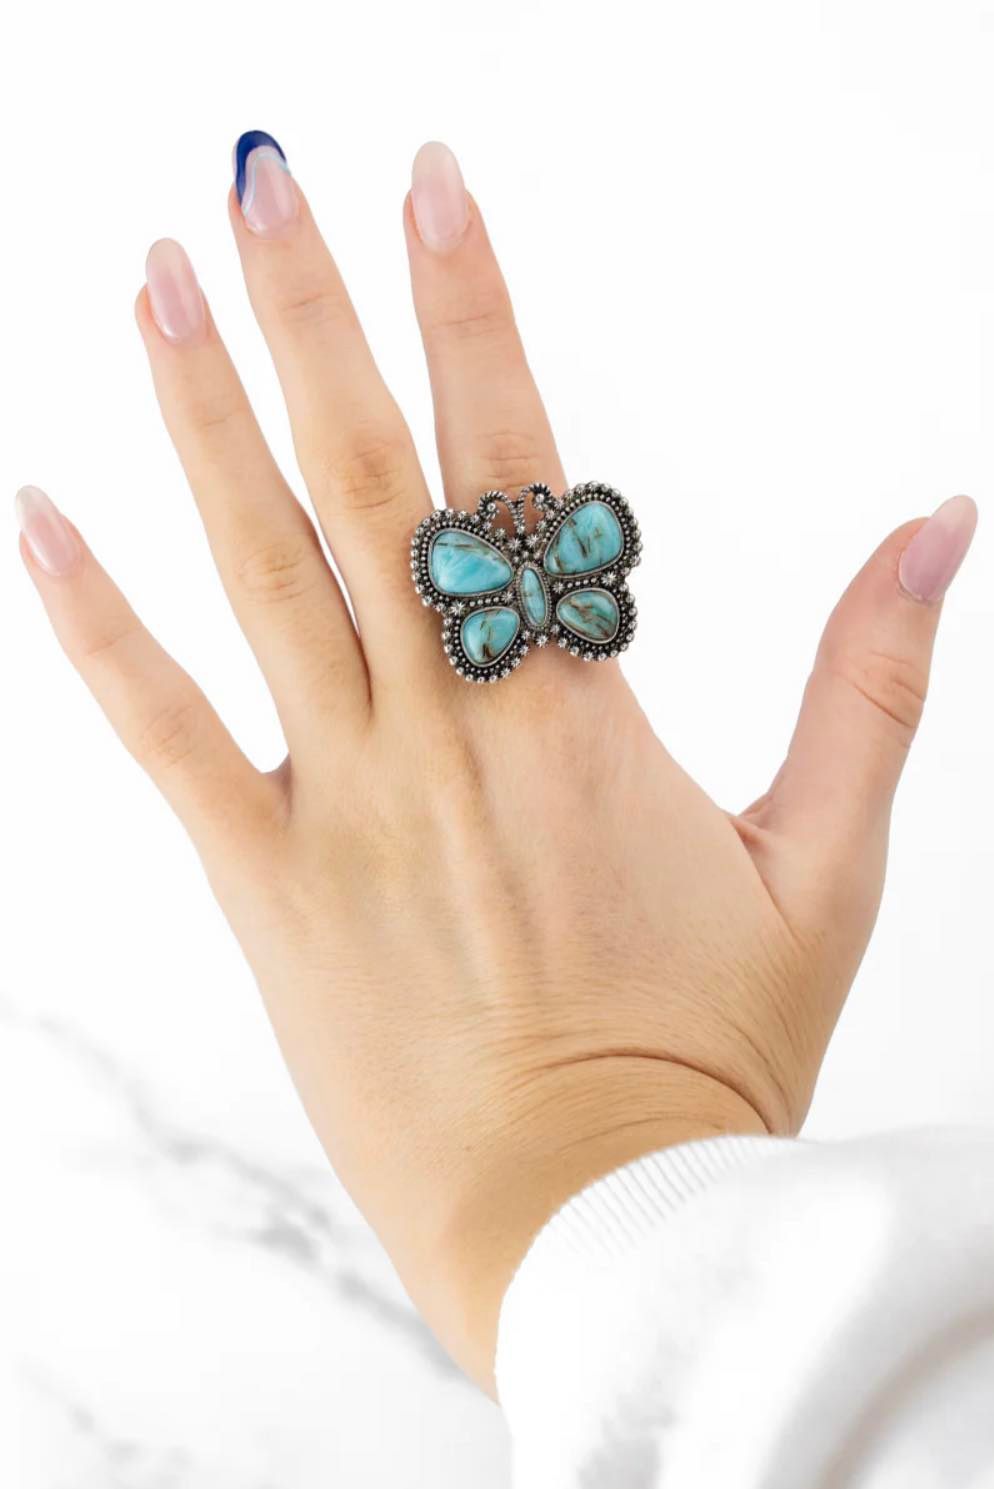 New Release Western Turquoise and Silver-tone Butterfly Ring - Heather's Heavenly Boutique